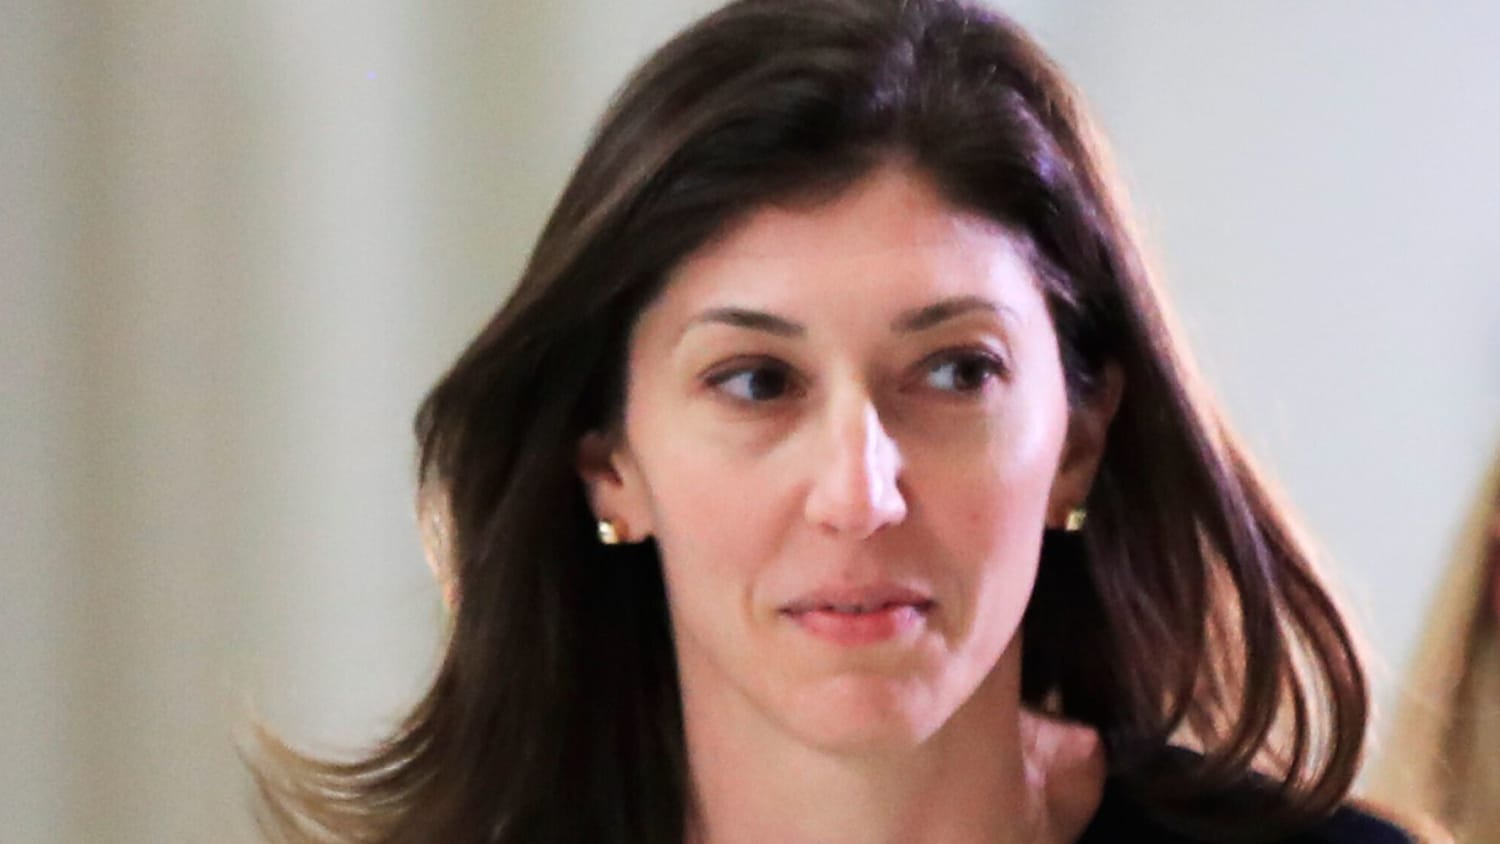 Trump Erupts After Attack Target Lisa Page Joins MSNBC As National Security Analyst